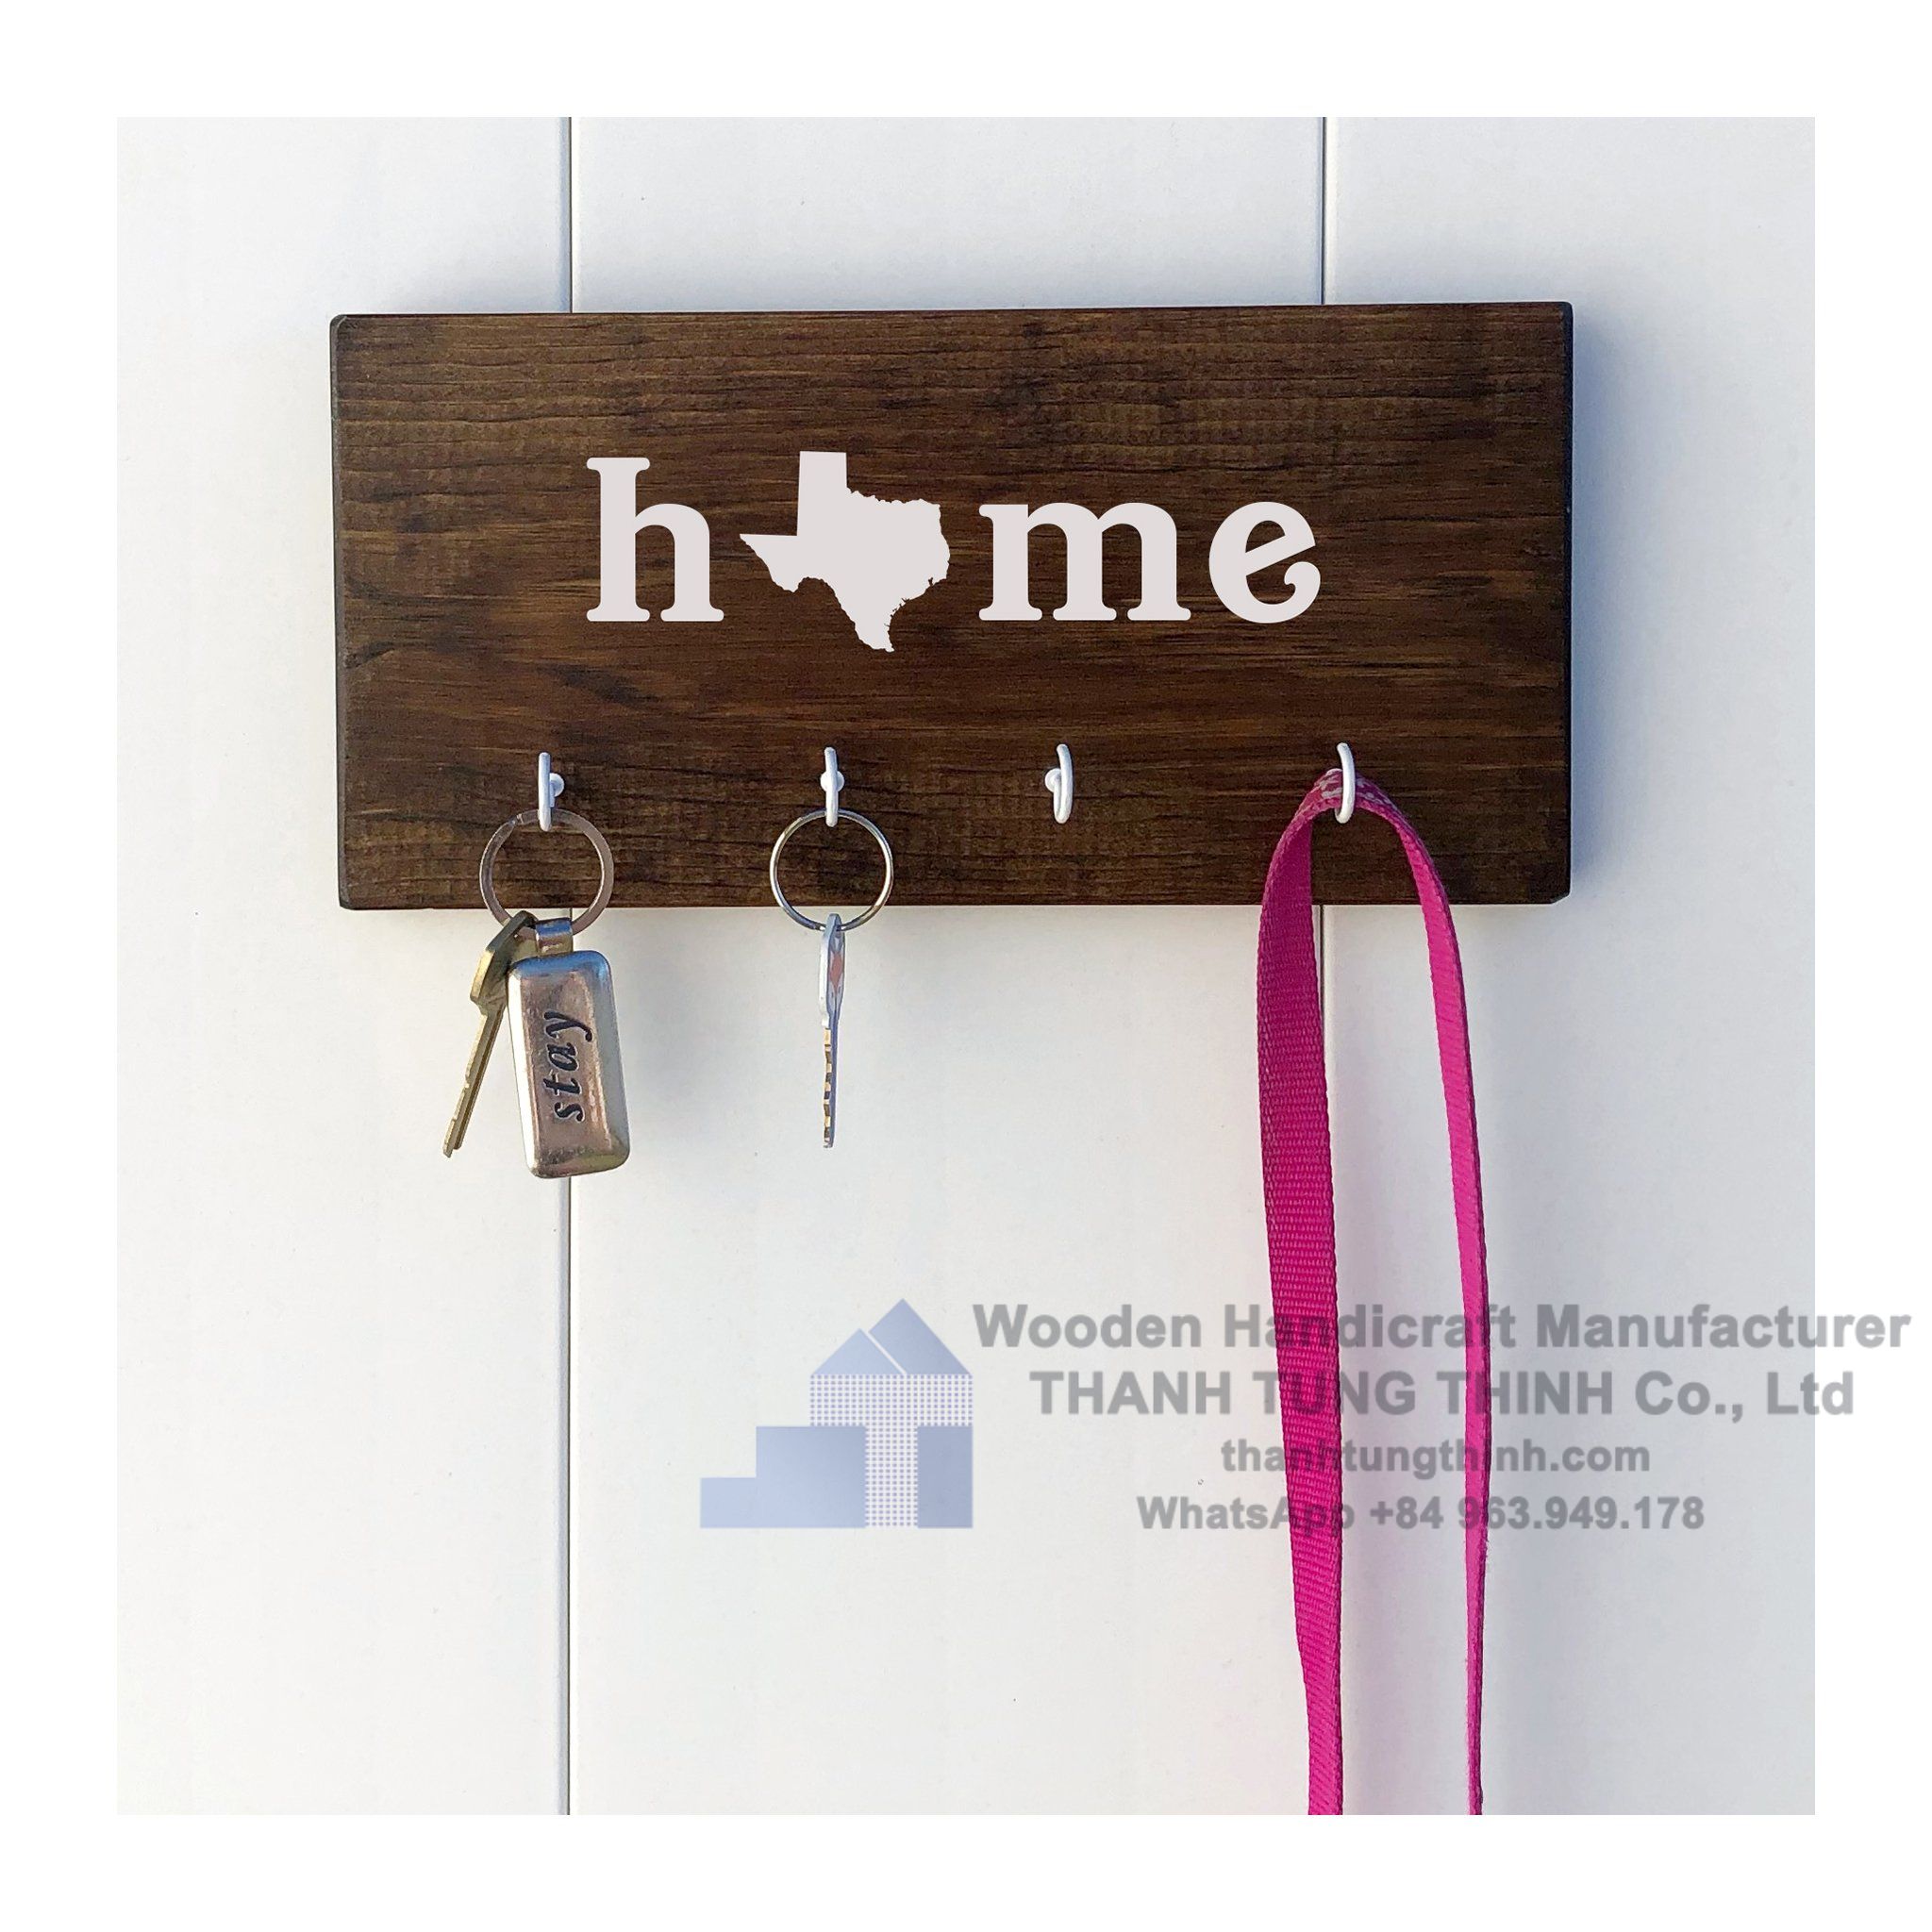 Classic Wooden Key Holder for minimalist